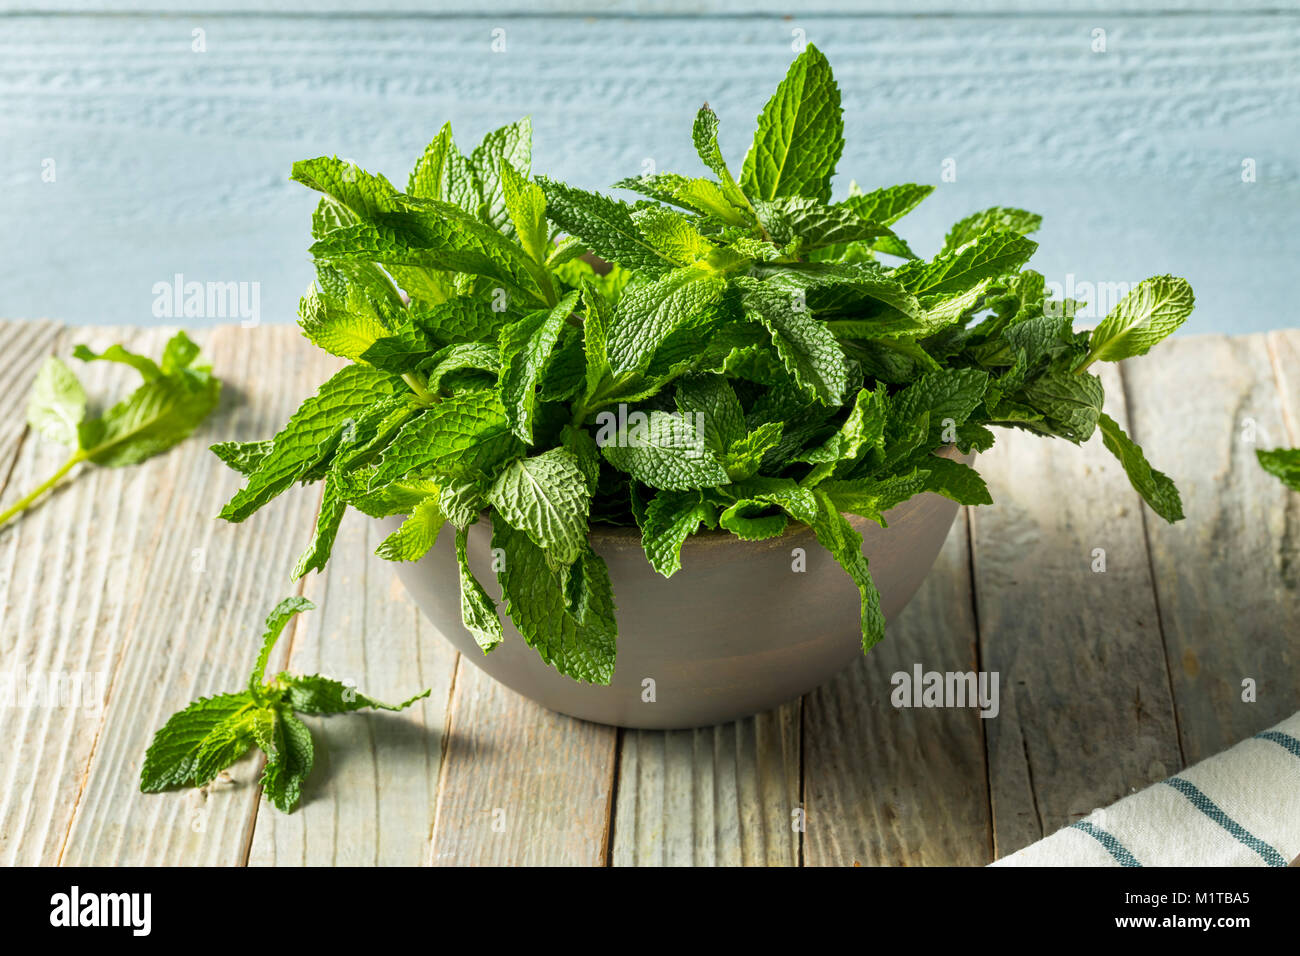 Raw Green Organic Fresh Mint Leaves in a Bunch Stock Photo